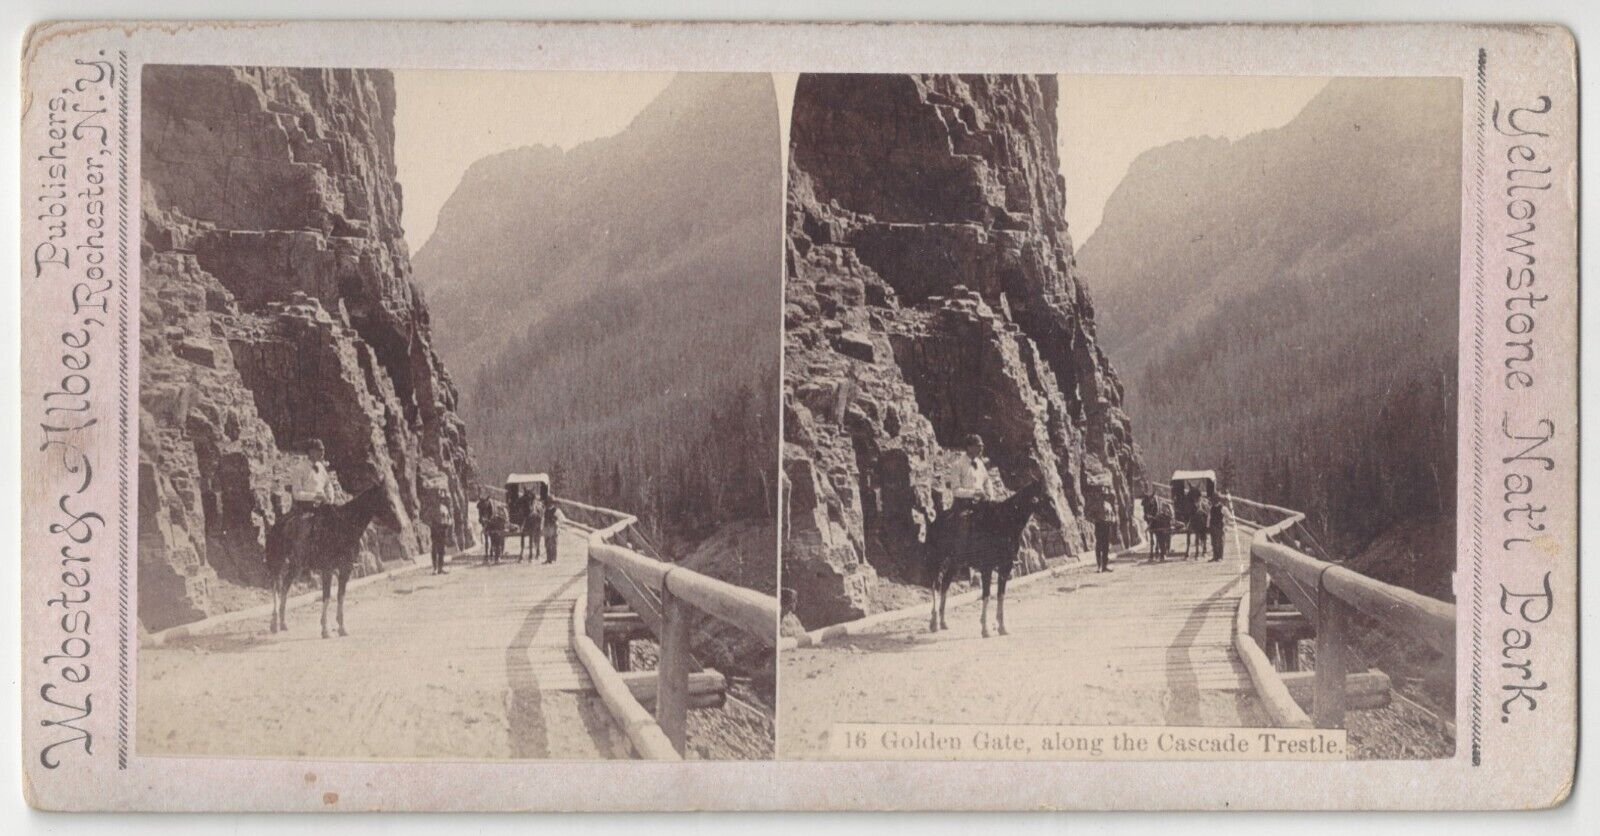 1890's Yellowstone, Montana Stereoview - Horse & Buggy on the Cascade Trestle